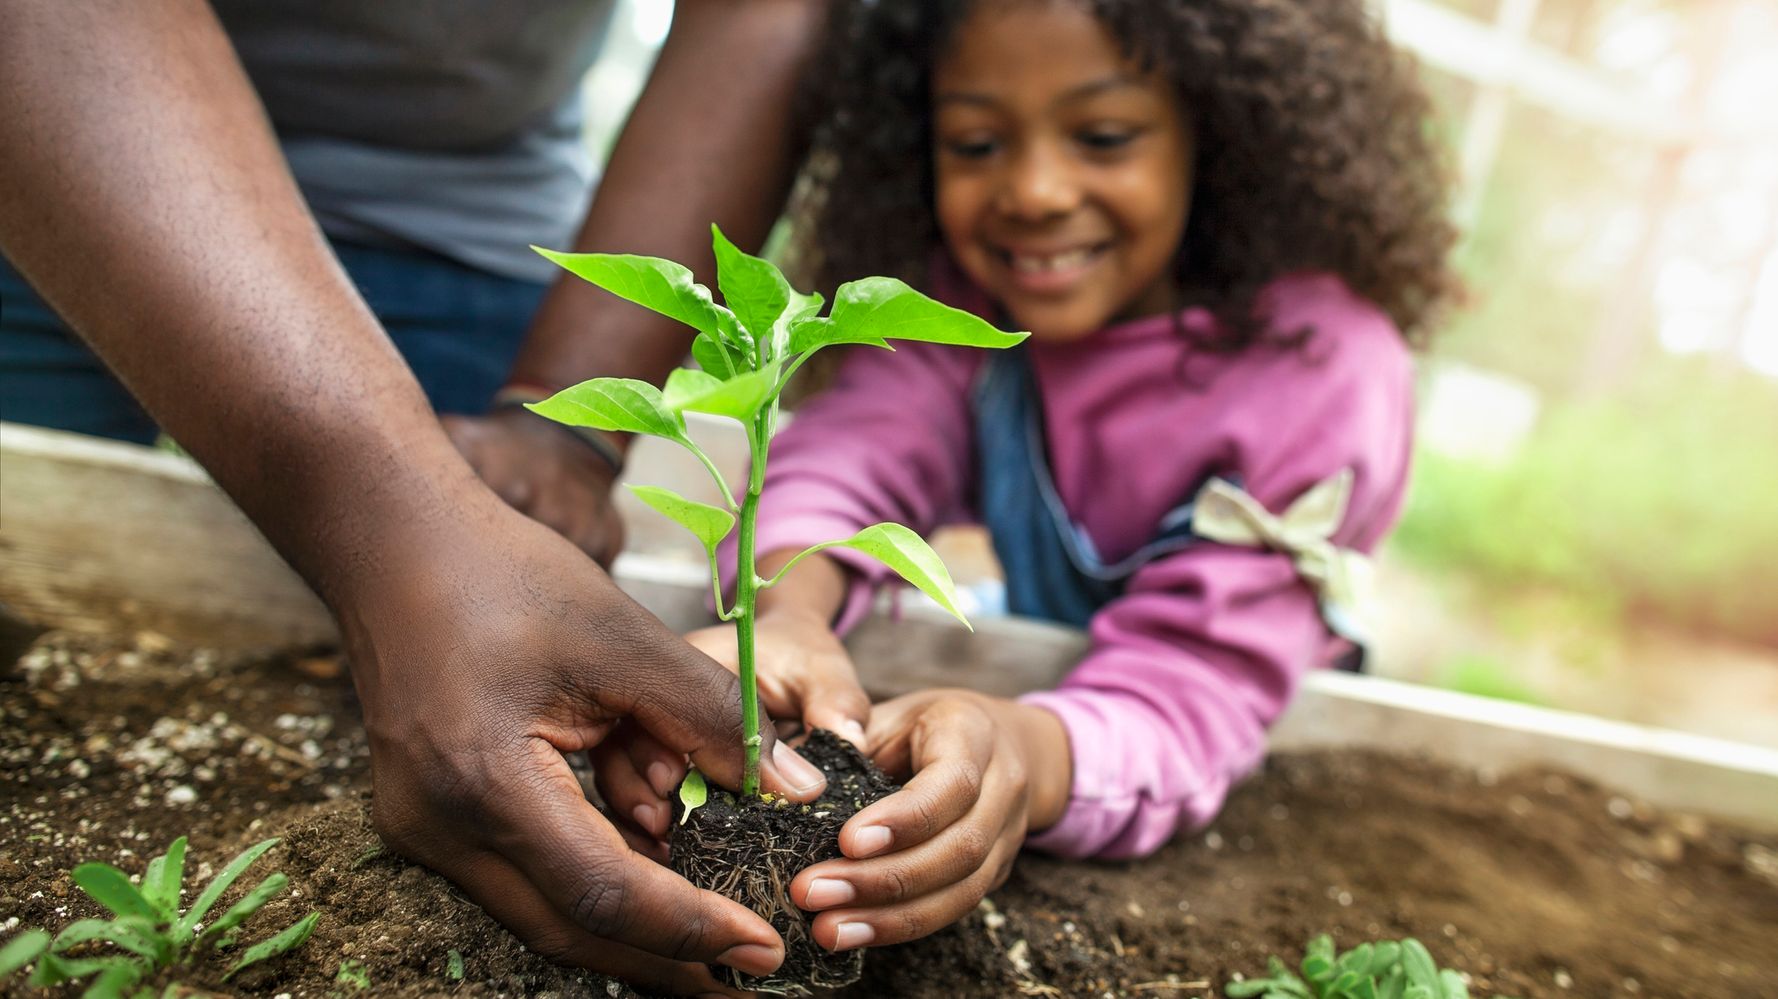 A young girl plants a sprout with help from an adult.